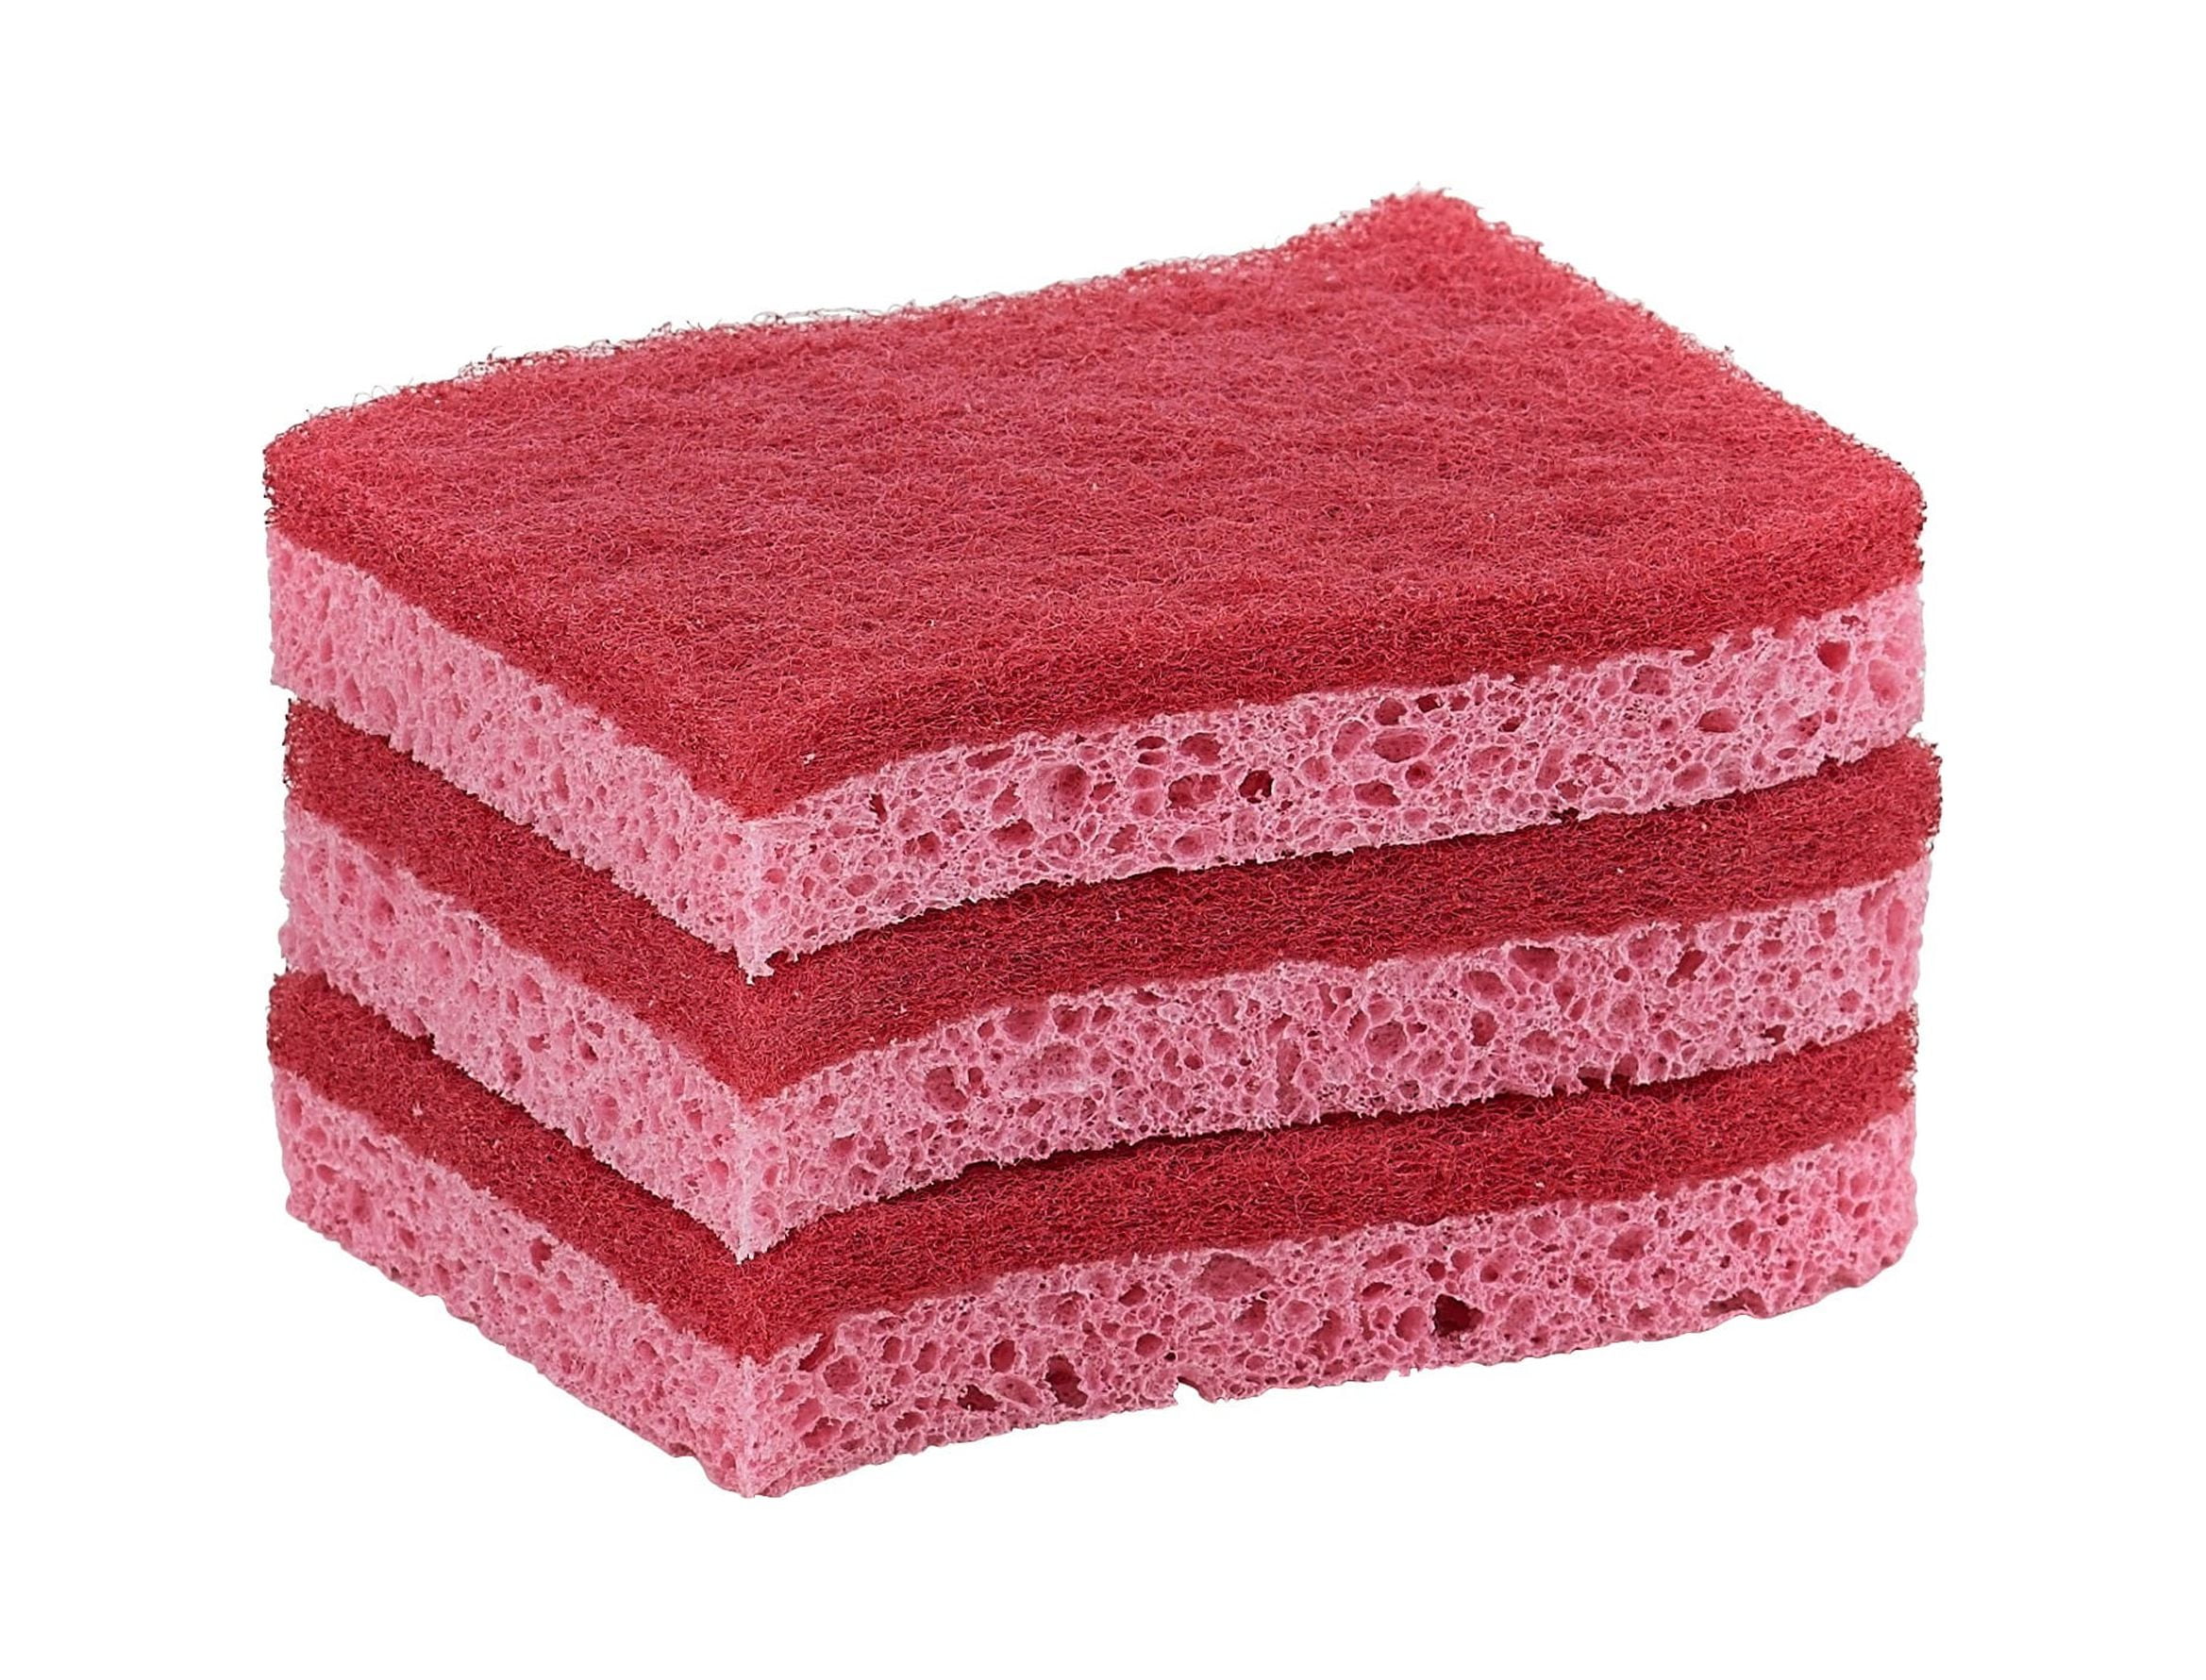 Pink Gradient Cellulose Scrub Sponge Non-Scratch Kitchen Dish Sponges  Reusable Scouring Pad for Washing Dishes and Cleaning Kitchen 3 Packs